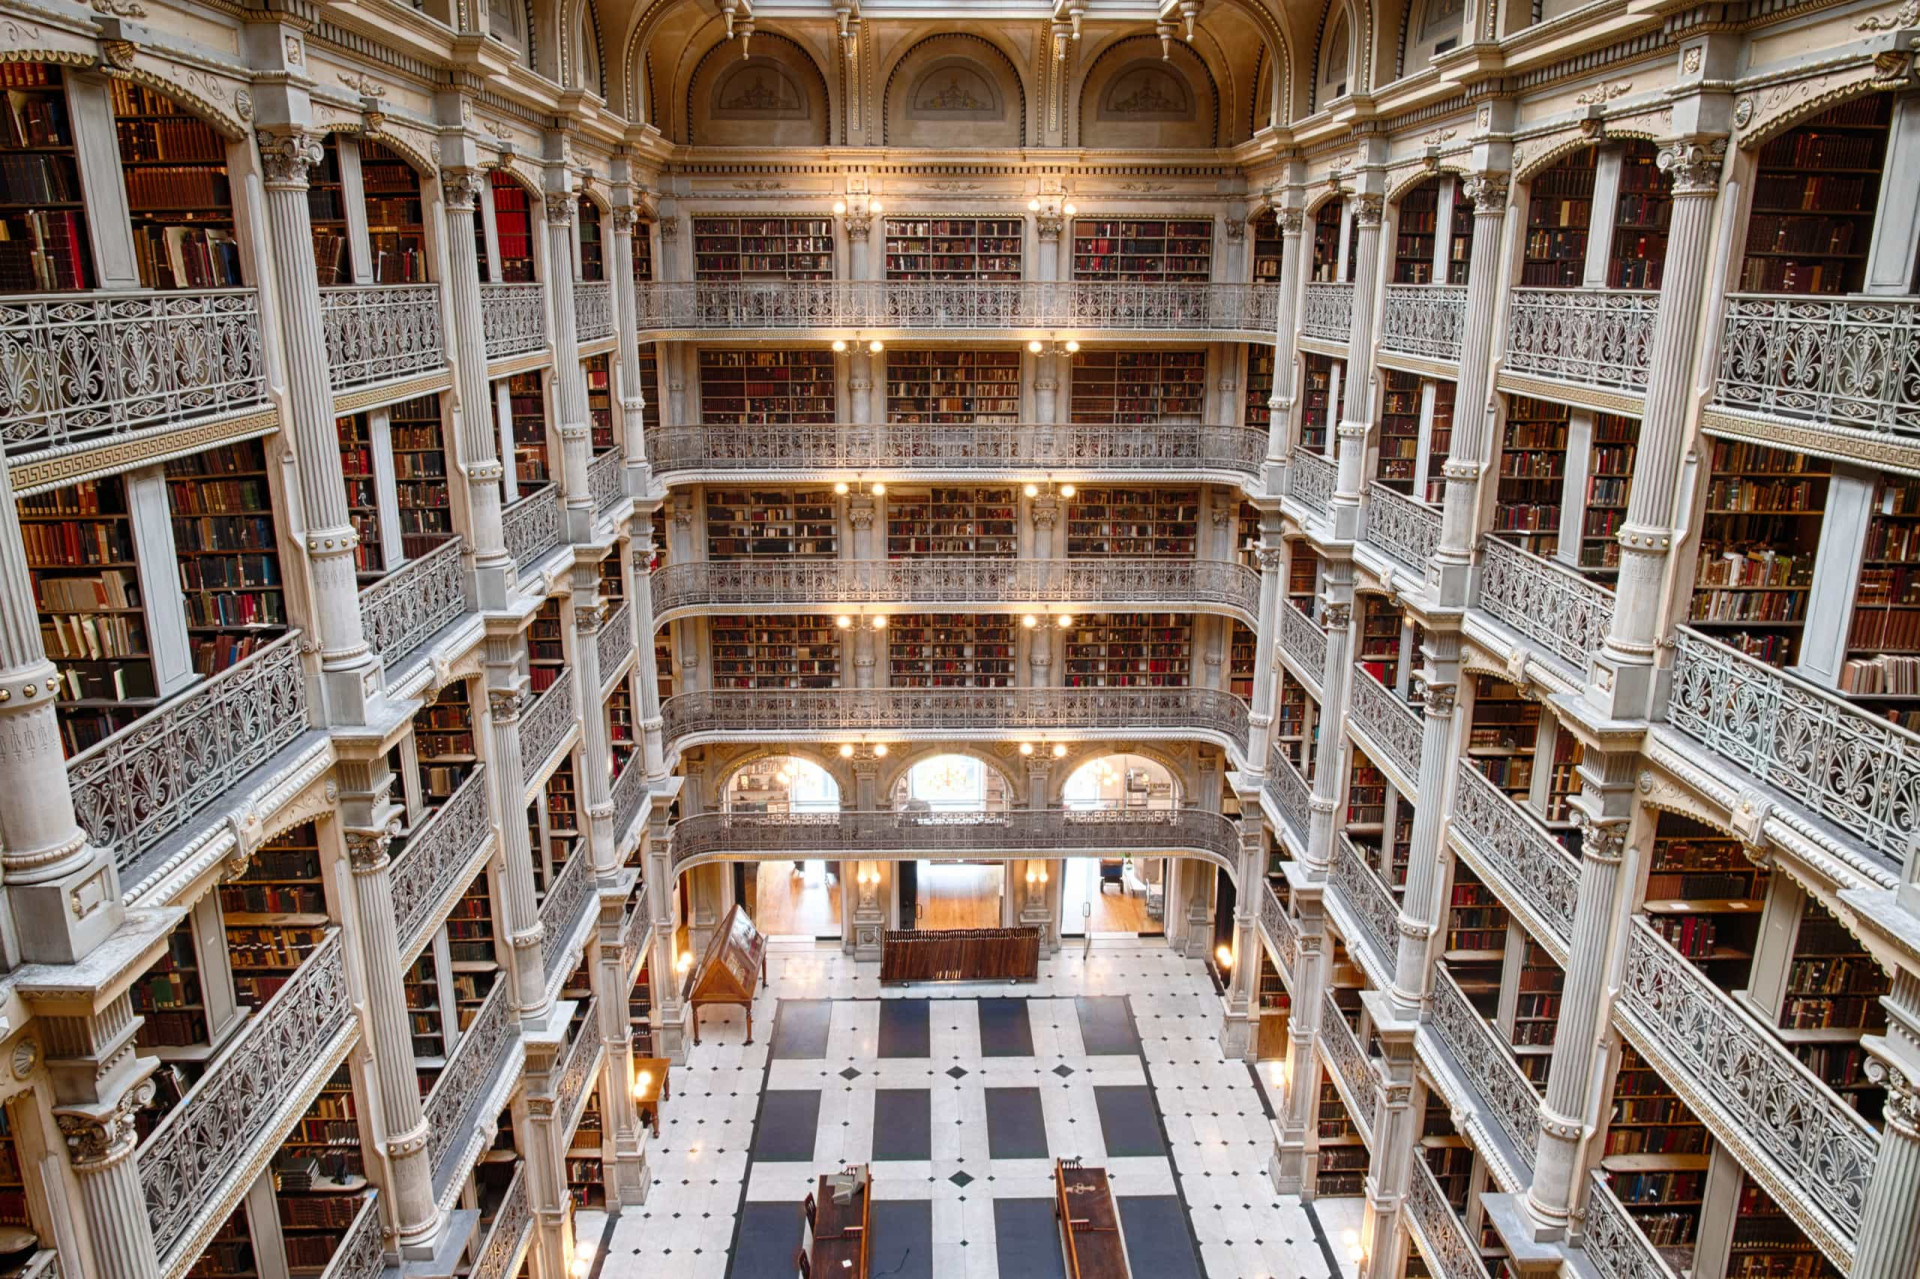 <p>Widely regarded as one of the most beautiful library spaces in the world, the venerable late 19th-century George Peabody Library is open to the public.</p><p><a href="https://www.msn.com/en-us/community/channel/vid-7xx8mnucu55yw63we9va2gwr7uihbxwc68fxqp25x6tg4ftibpra?cvid=94631541bc0f4f89bfd59158d696ad7e">Follow us and access great exclusive content every day</a></p>